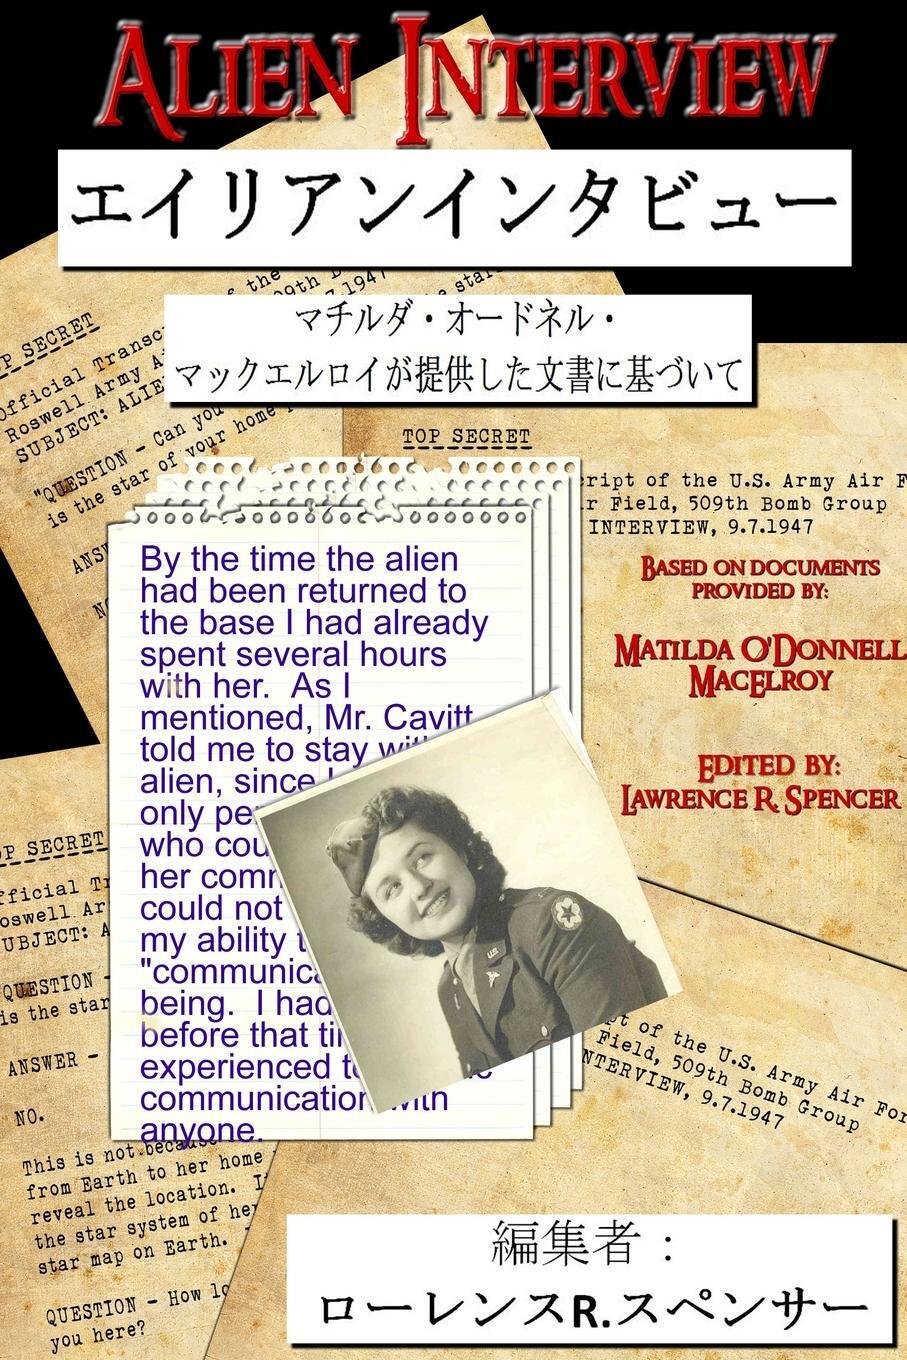 фото ALIEN INTERVIEW - JAPANESE EDITION